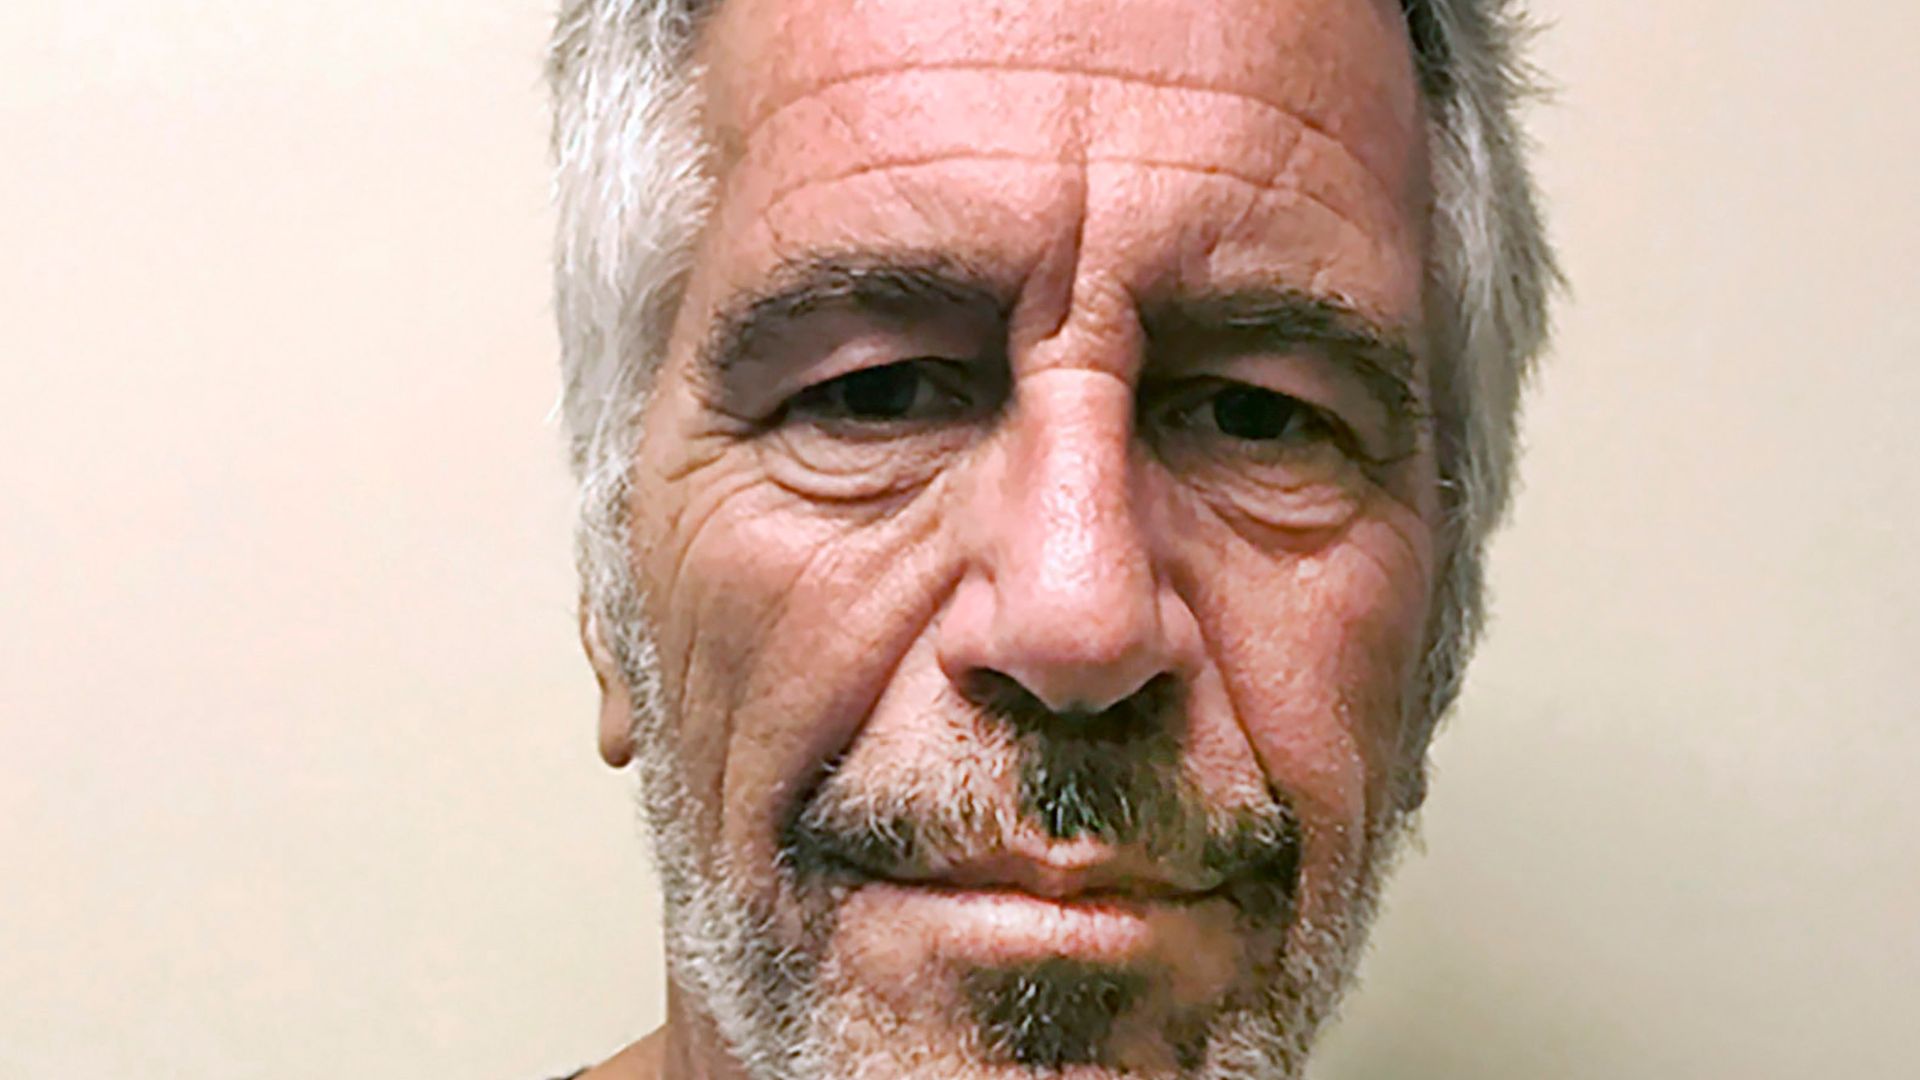 The House voted to reauthorize a bill signed into law over 20 years ago, used to prosecute human traffickers like Jeffrey Epstein.